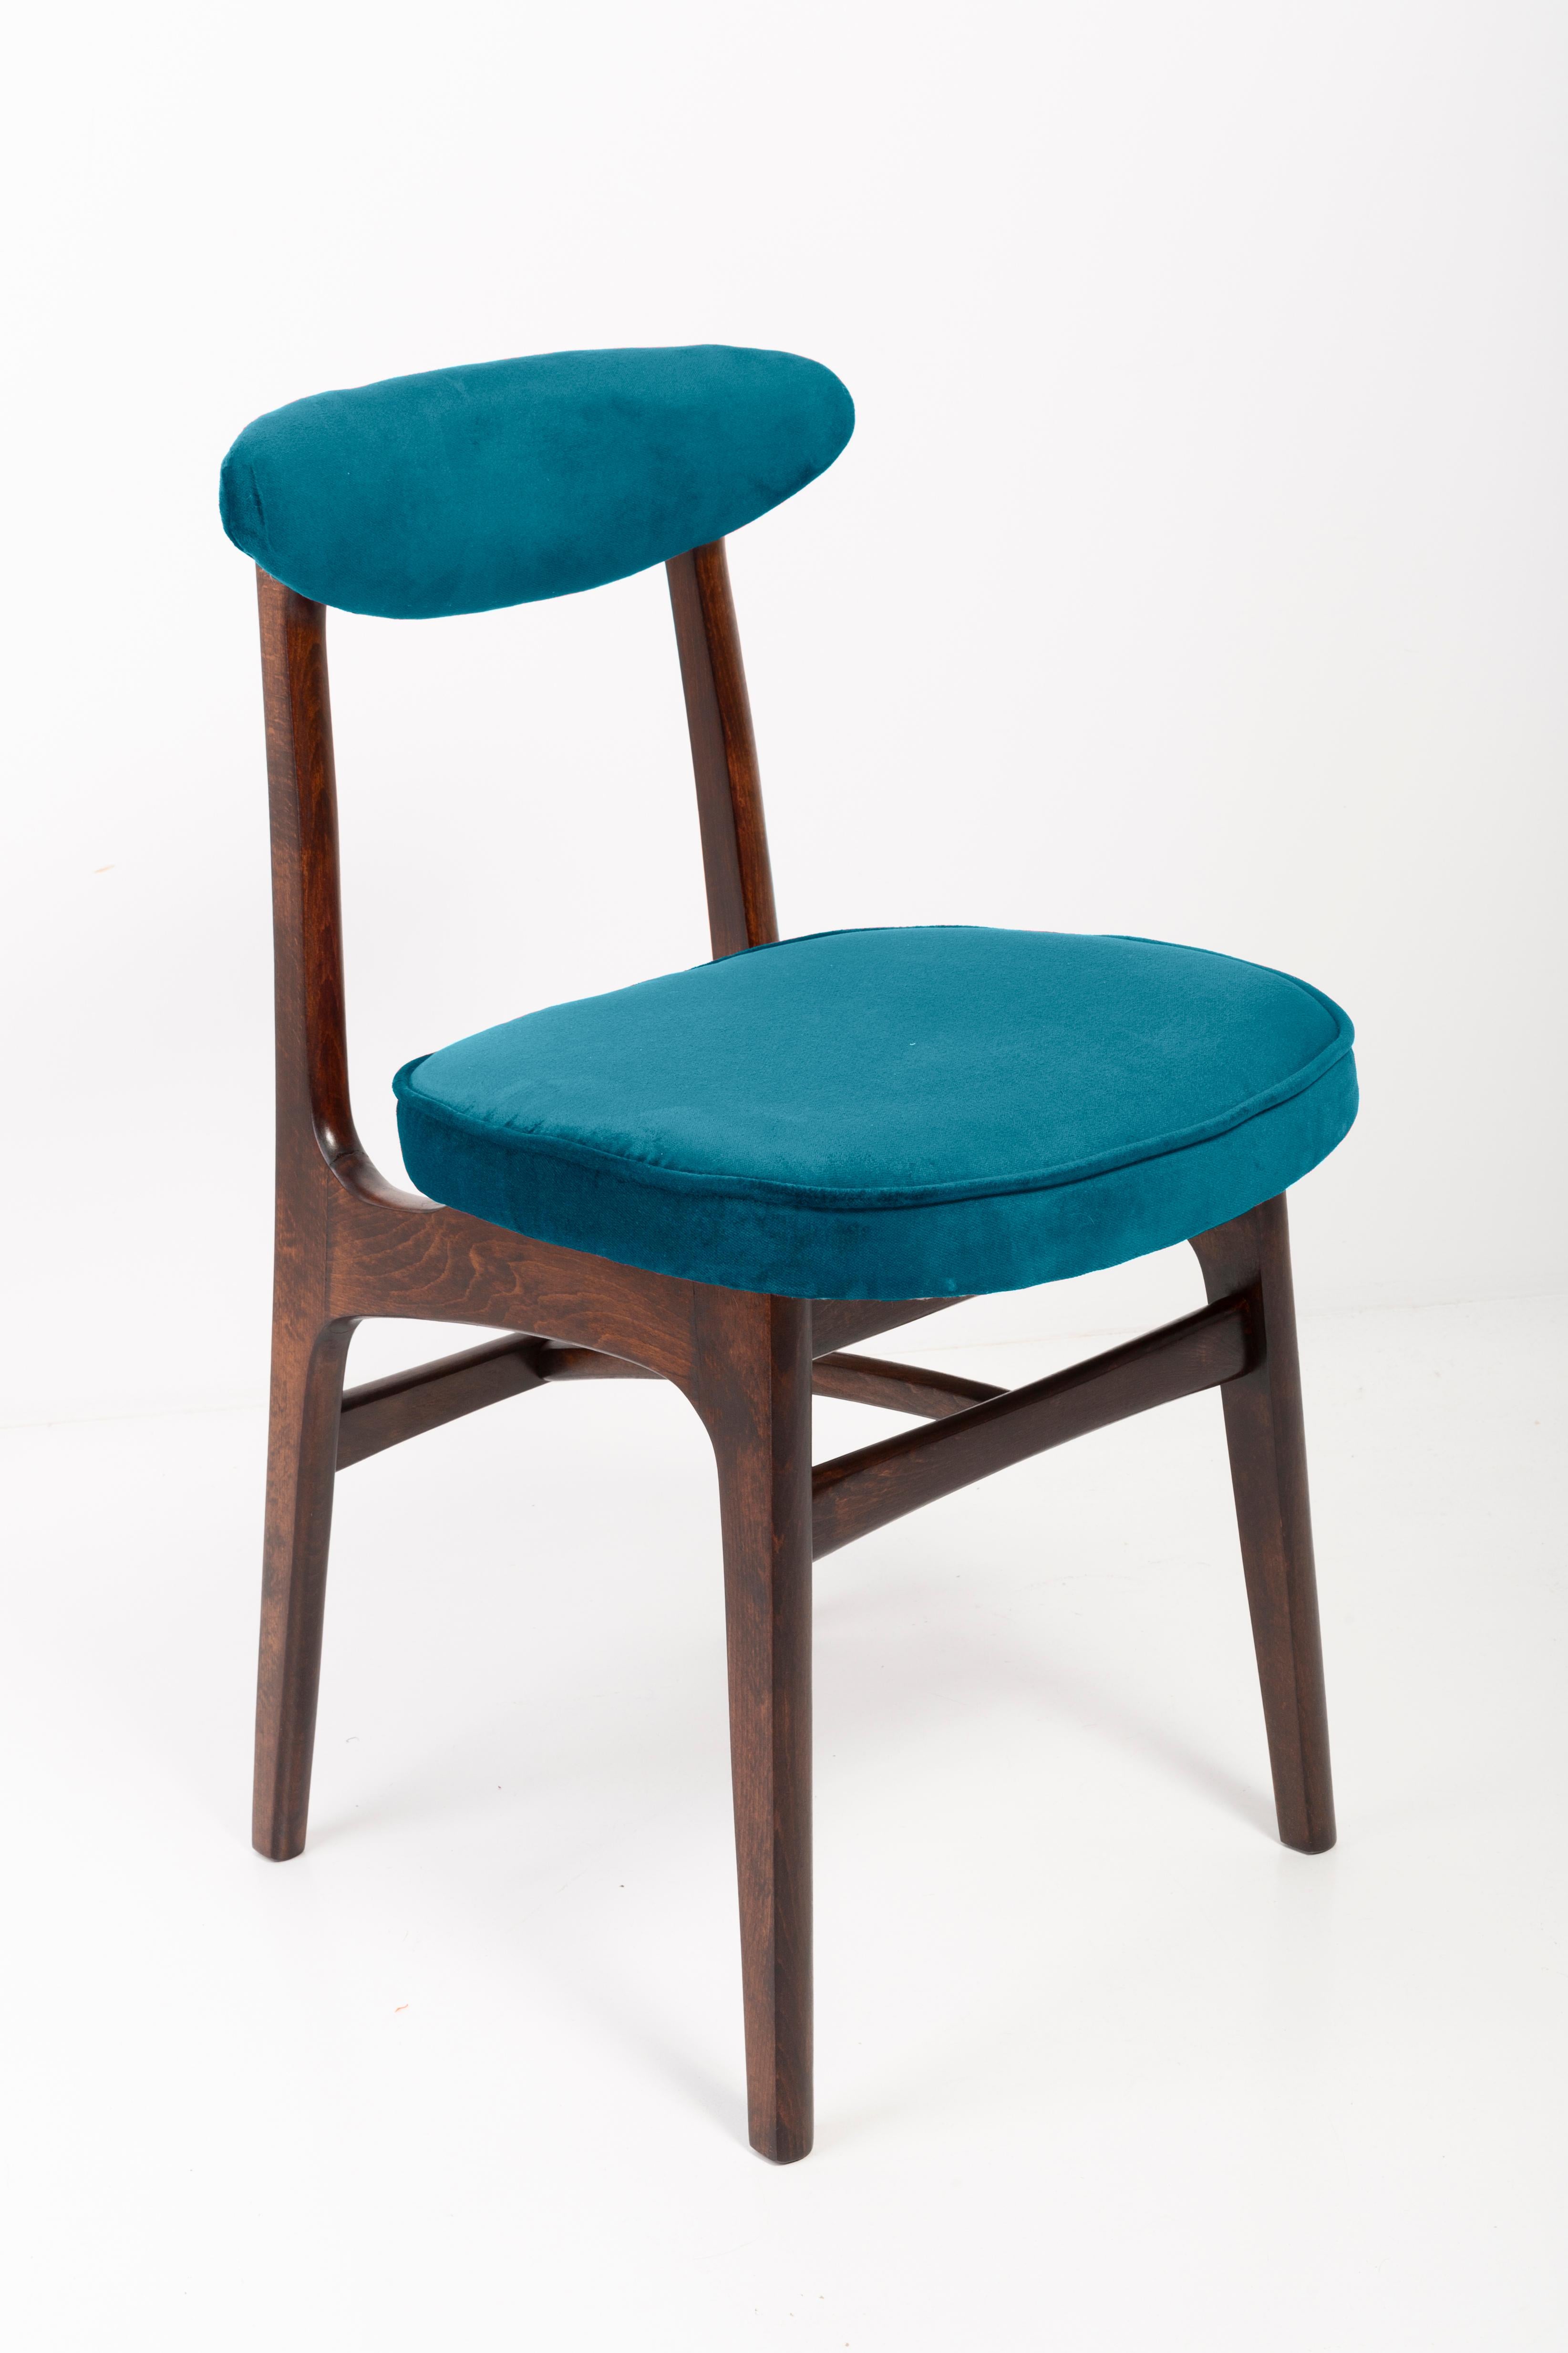 Twelve chairs designed by Prof. Rajmund Halas. It has been made of beechwood. Chairs are after undergone a complete upholstery renovation, the woodwork has been refreshed. Seats and backs were dressed in a petrol blue (color 973), durable and